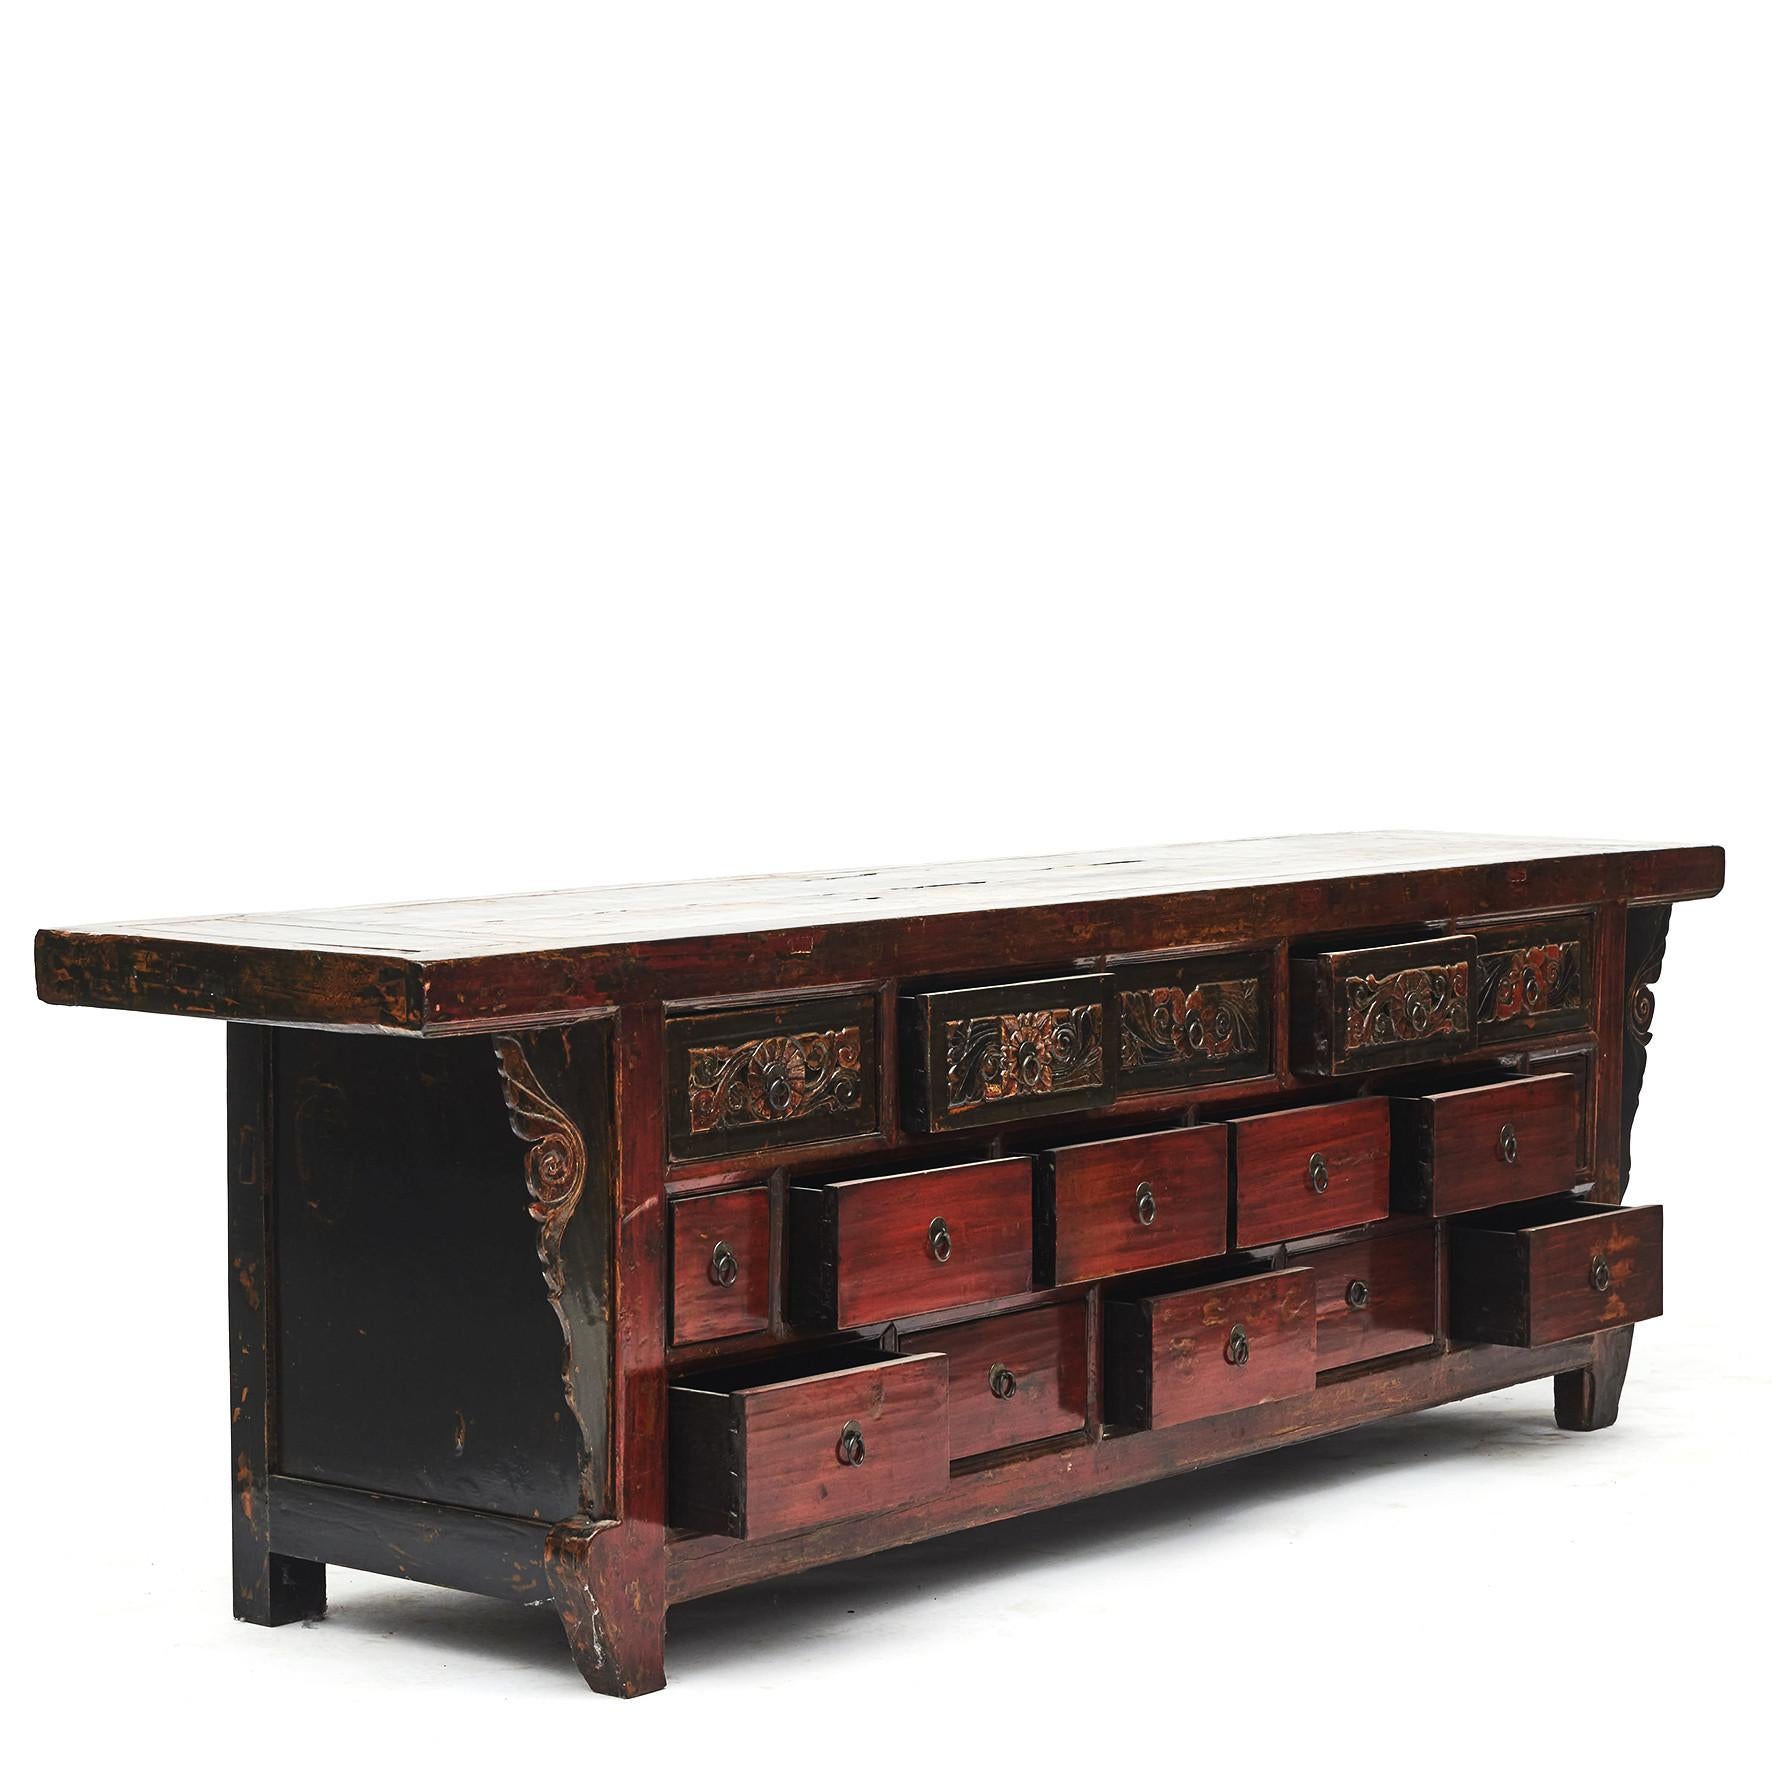 This large 19th century Chinese elmwood altar sideboard features a rectangular top sitting above 16 drawers flanked by two carved spandrels connecting the front to the cabinet's top.
Original lacquer in black, red and green colors.
Top drawers and